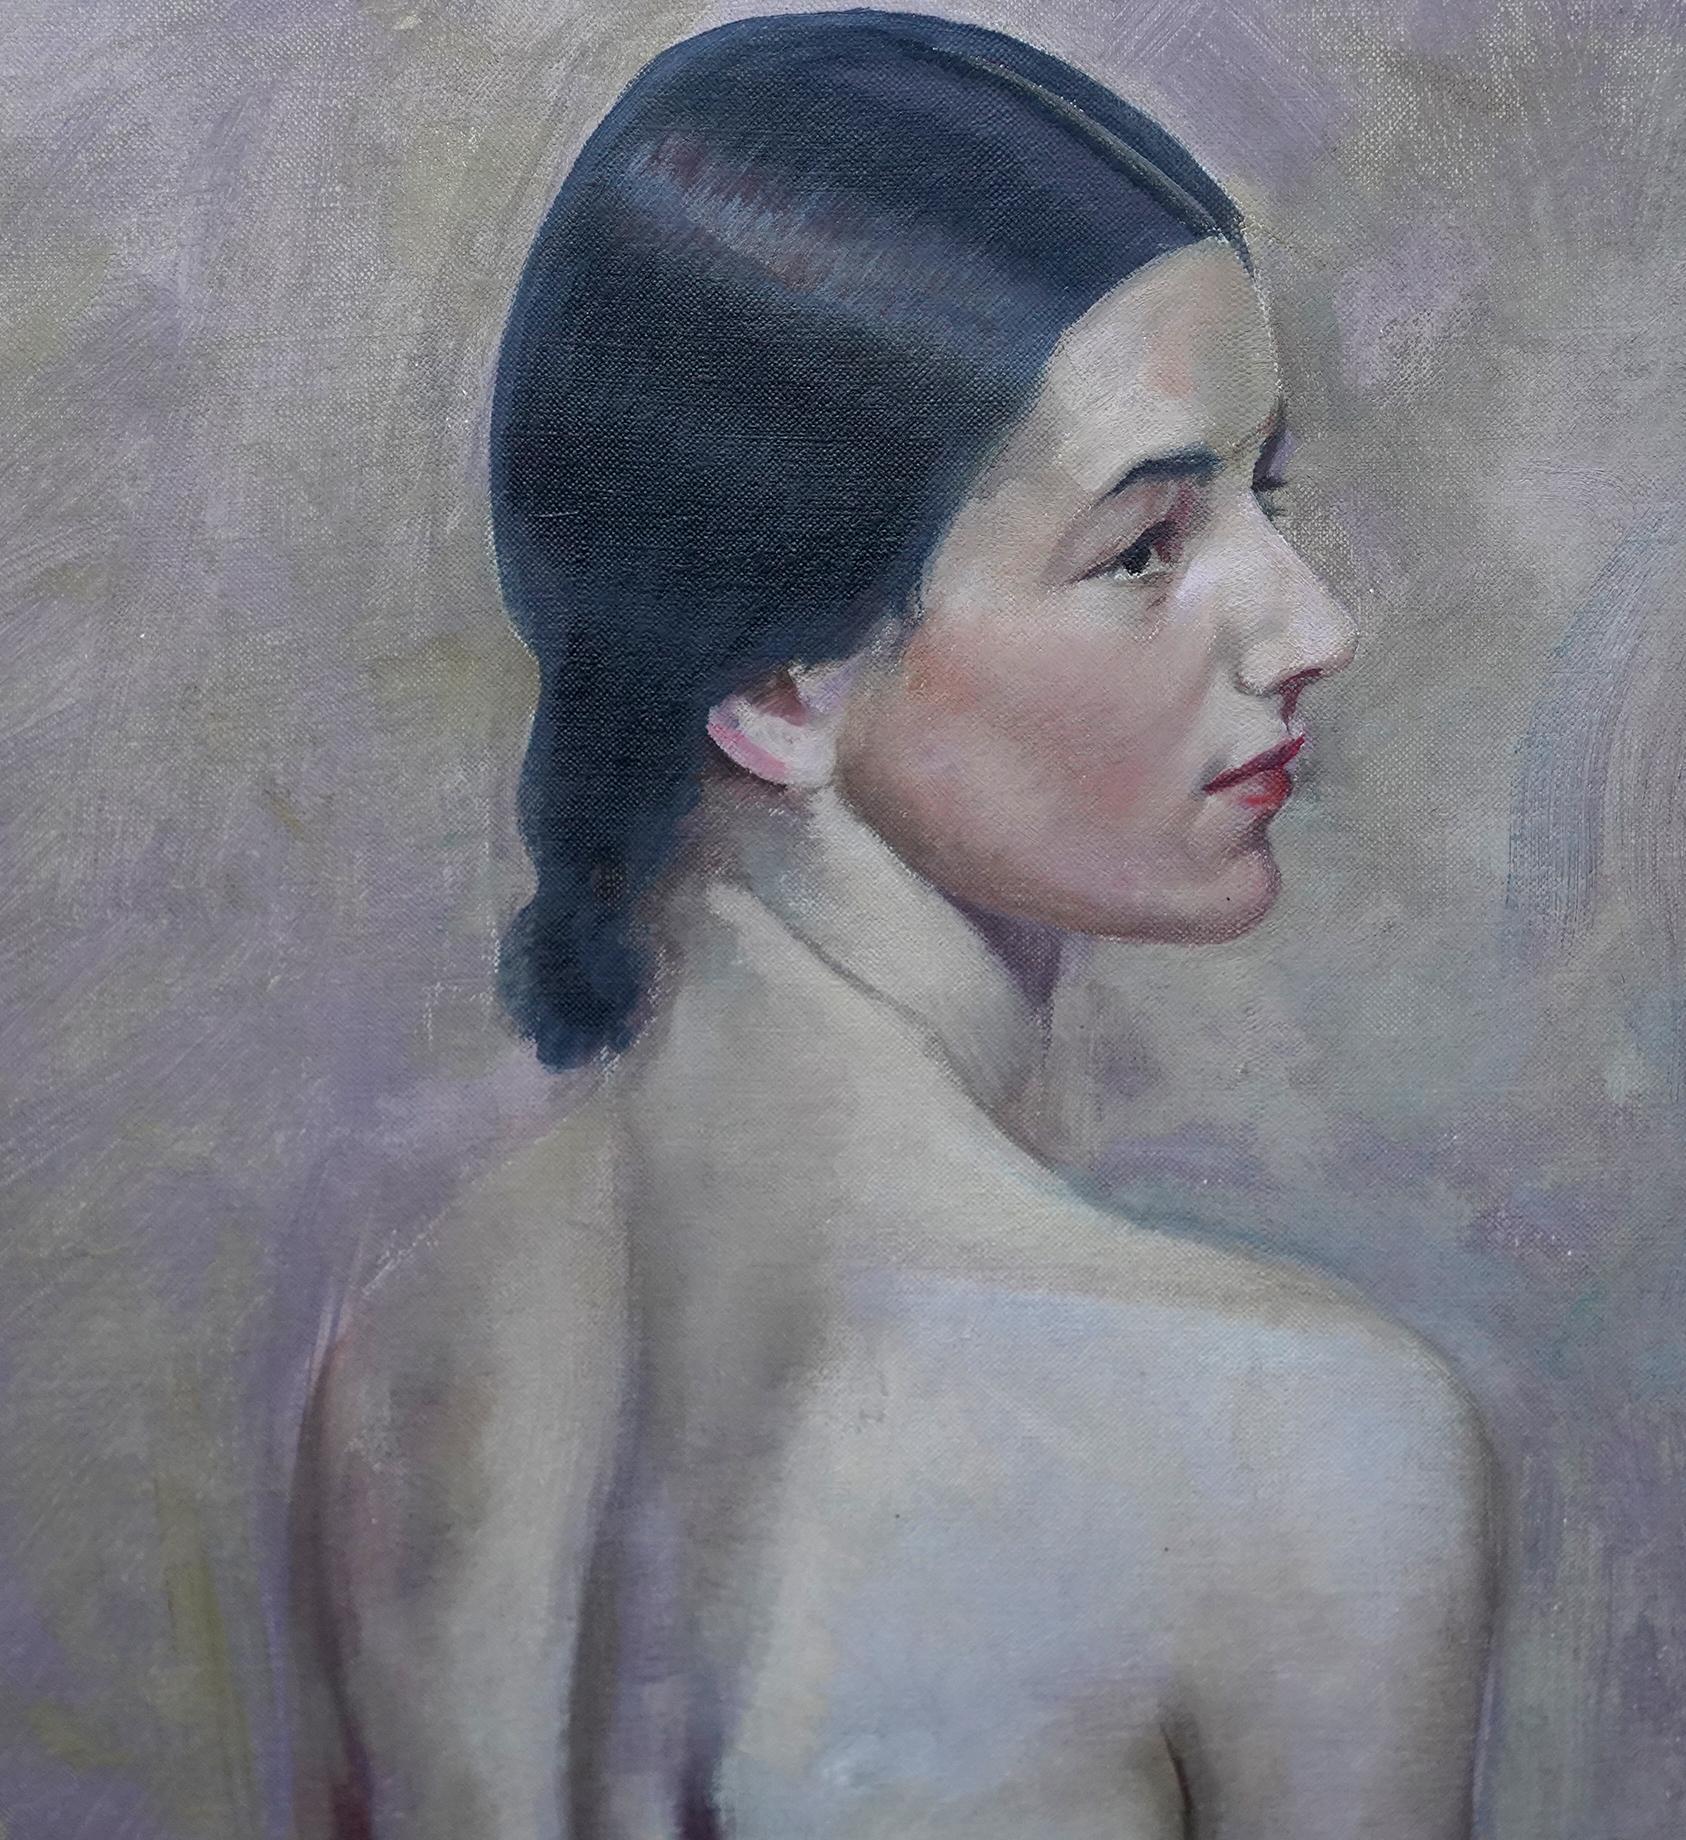 This enigmatic portrait oil painting is by noted Slade School artist John Cecil Stephenson. In 1929, when Portrait of Elizabeth Allison was completed, Stephenson was living in Hampstead, working alongside other leading figures in British Modernism